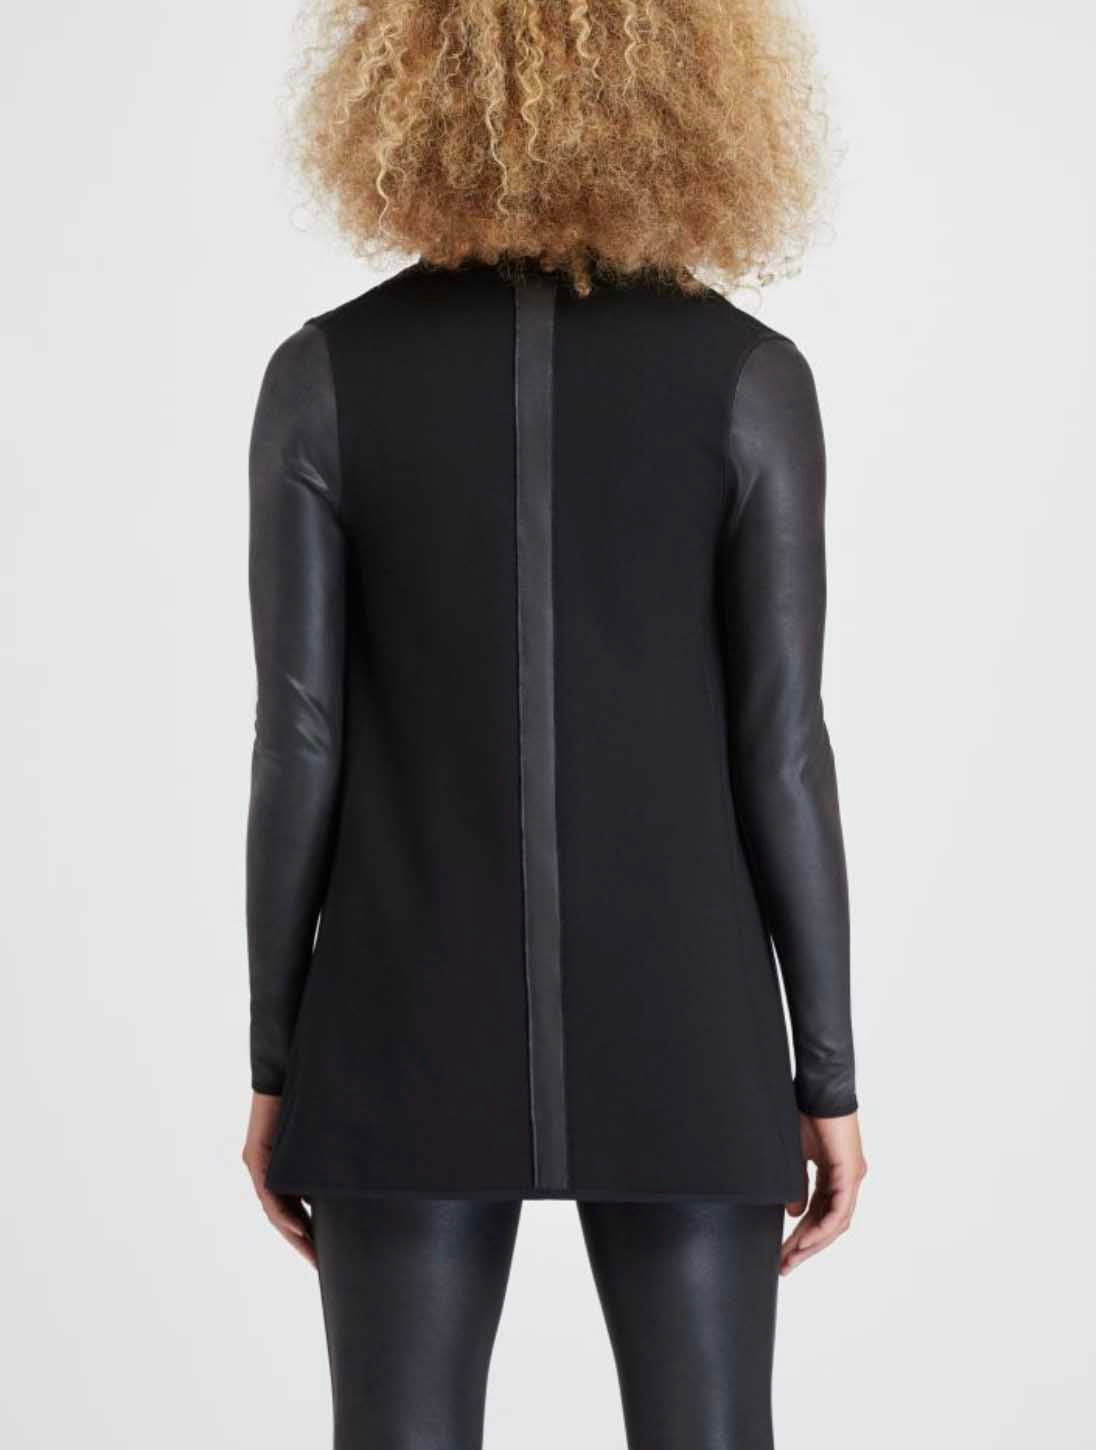 Spanx Drape Front Jacket Black - $100 (44% Off Retail) - From